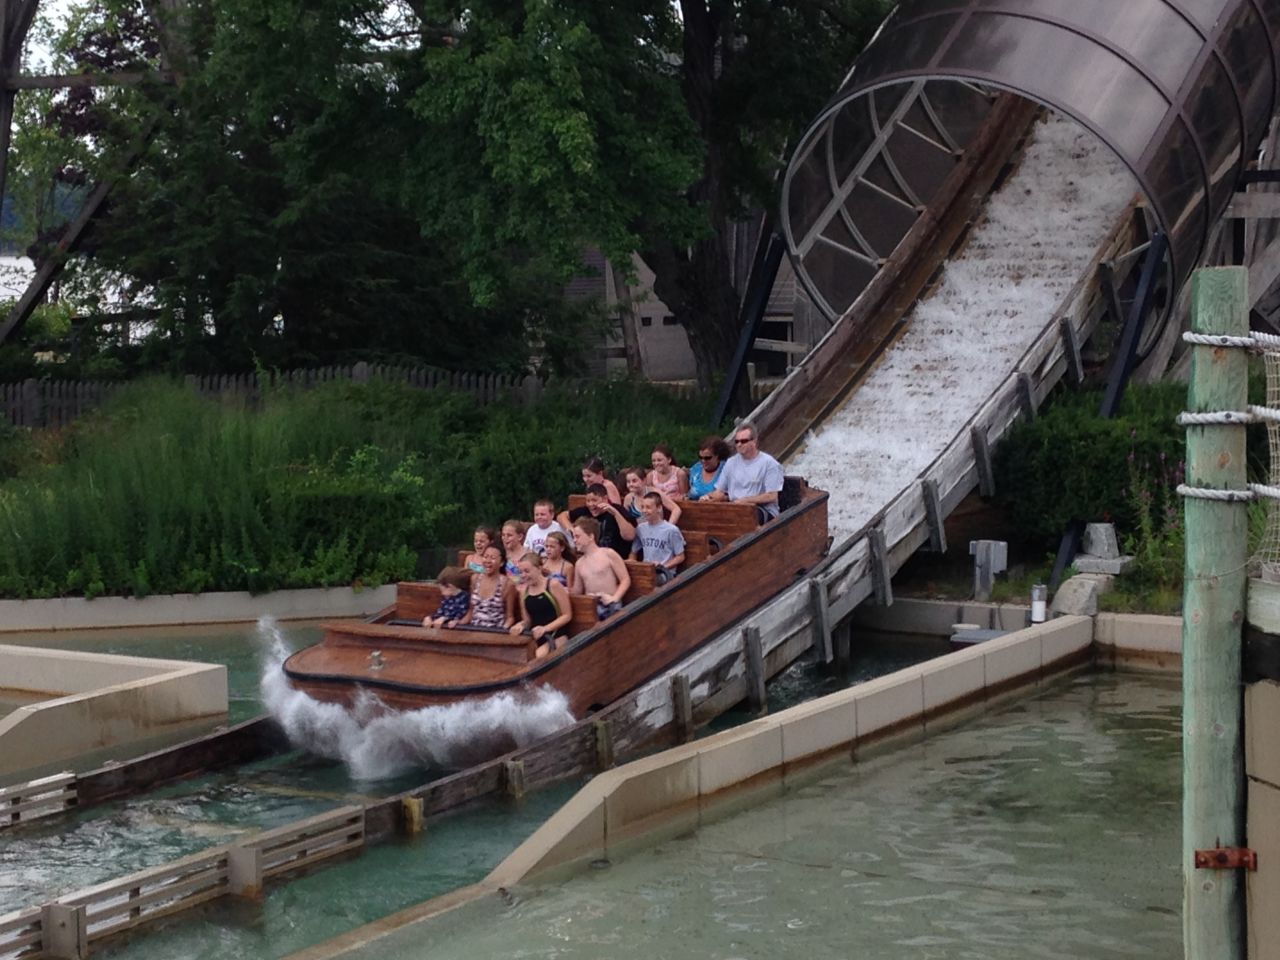 "I have such fond memories in the park, especially sharing a ride on the swing or airplane with my dad," Olson said. Over the years, Canobie Lake Park has outfitted itself with roller coasters and other heart-pumping rides.